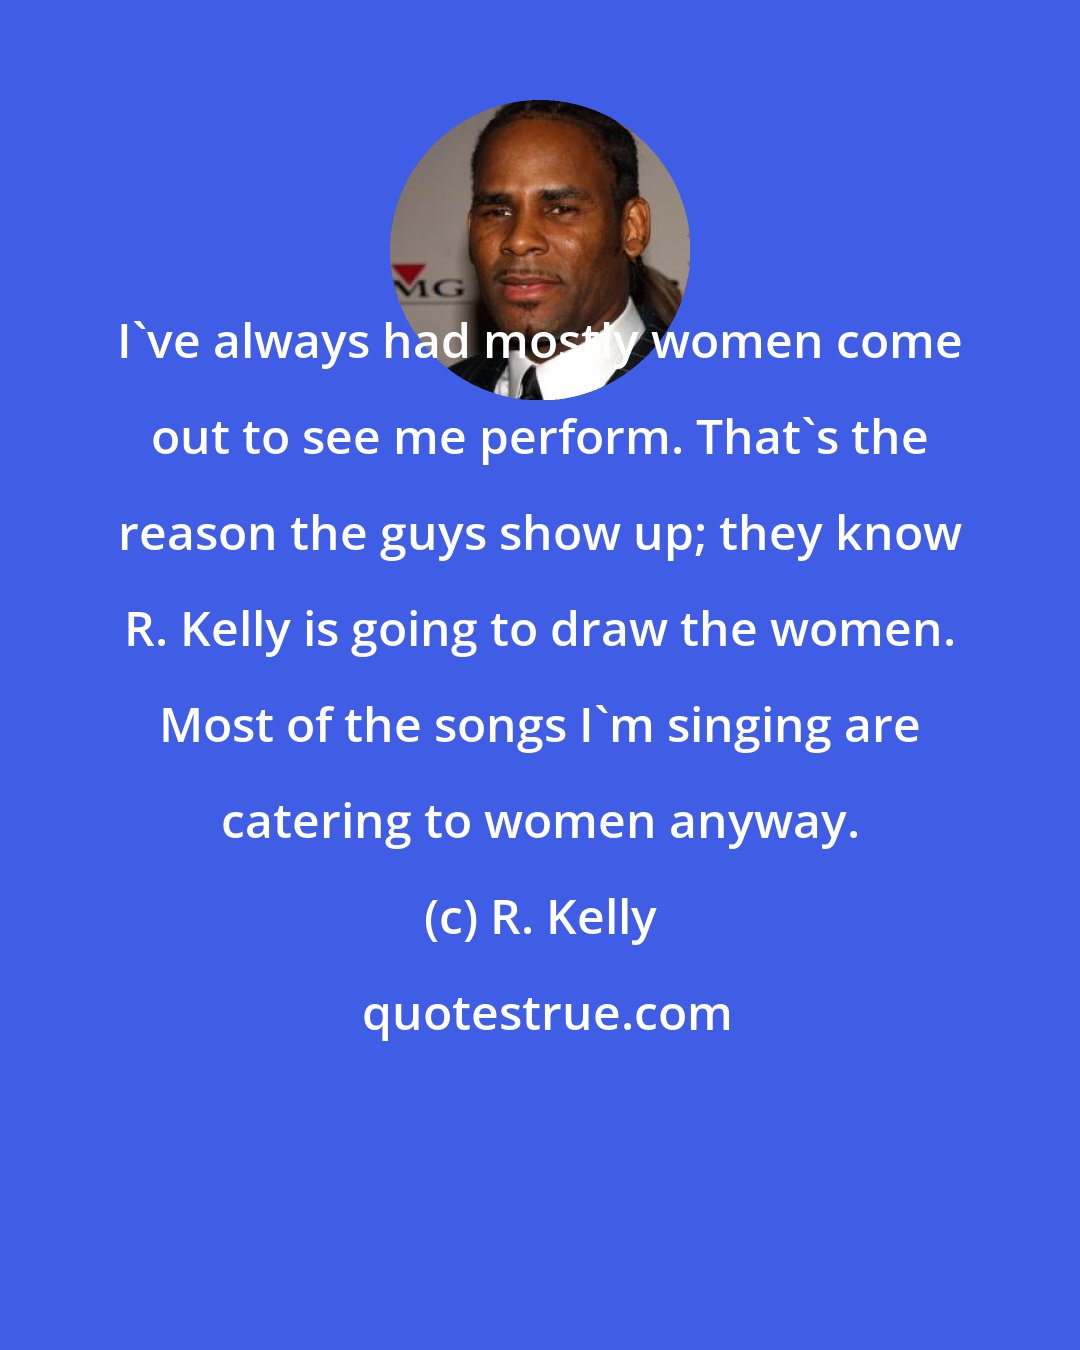 R. Kelly: I've always had mostly women come out to see me perform. That's the reason the guys show up; they know R. Kelly is going to draw the women. Most of the songs I'm singing are catering to women anyway.